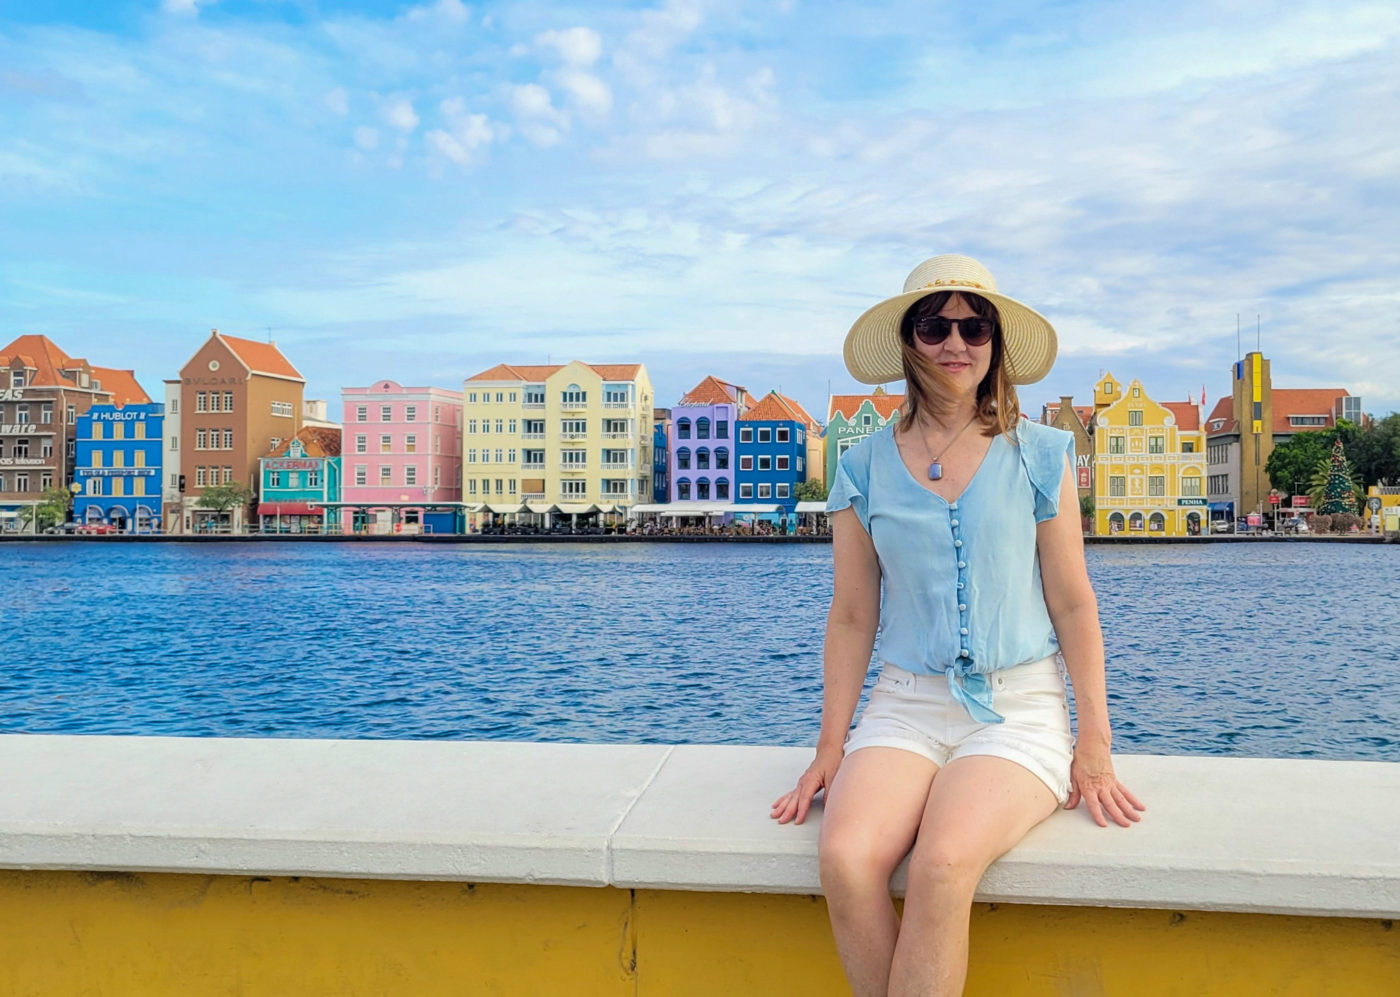 Colorful Willemstad, Curacao Top Attractions and Things to Do